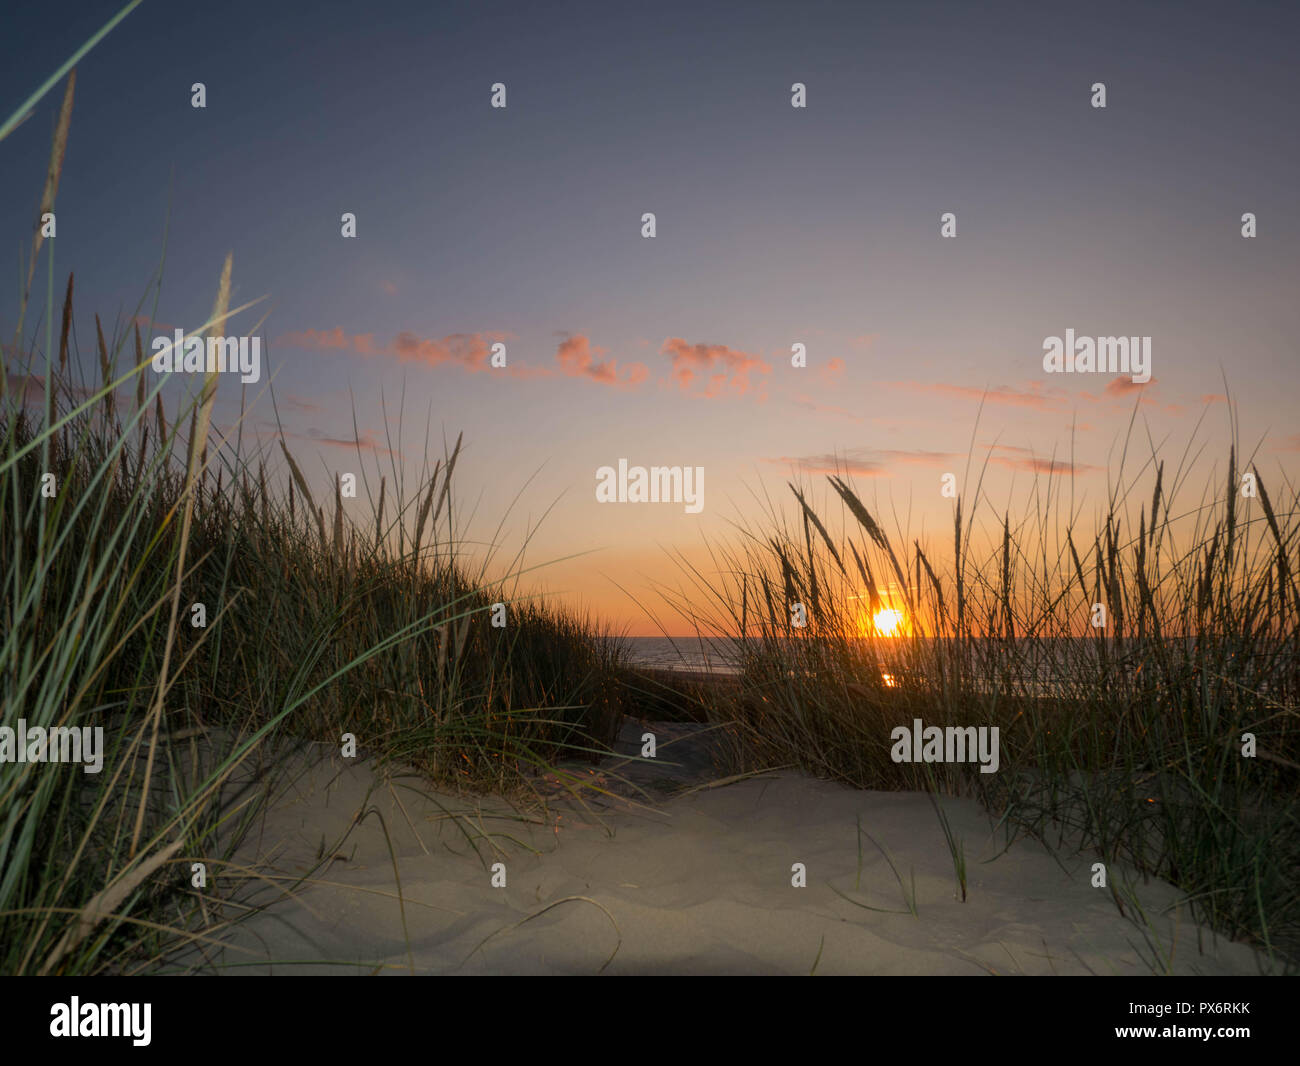 View from below through marram grass towards the setting sun at the beach Stock Photo